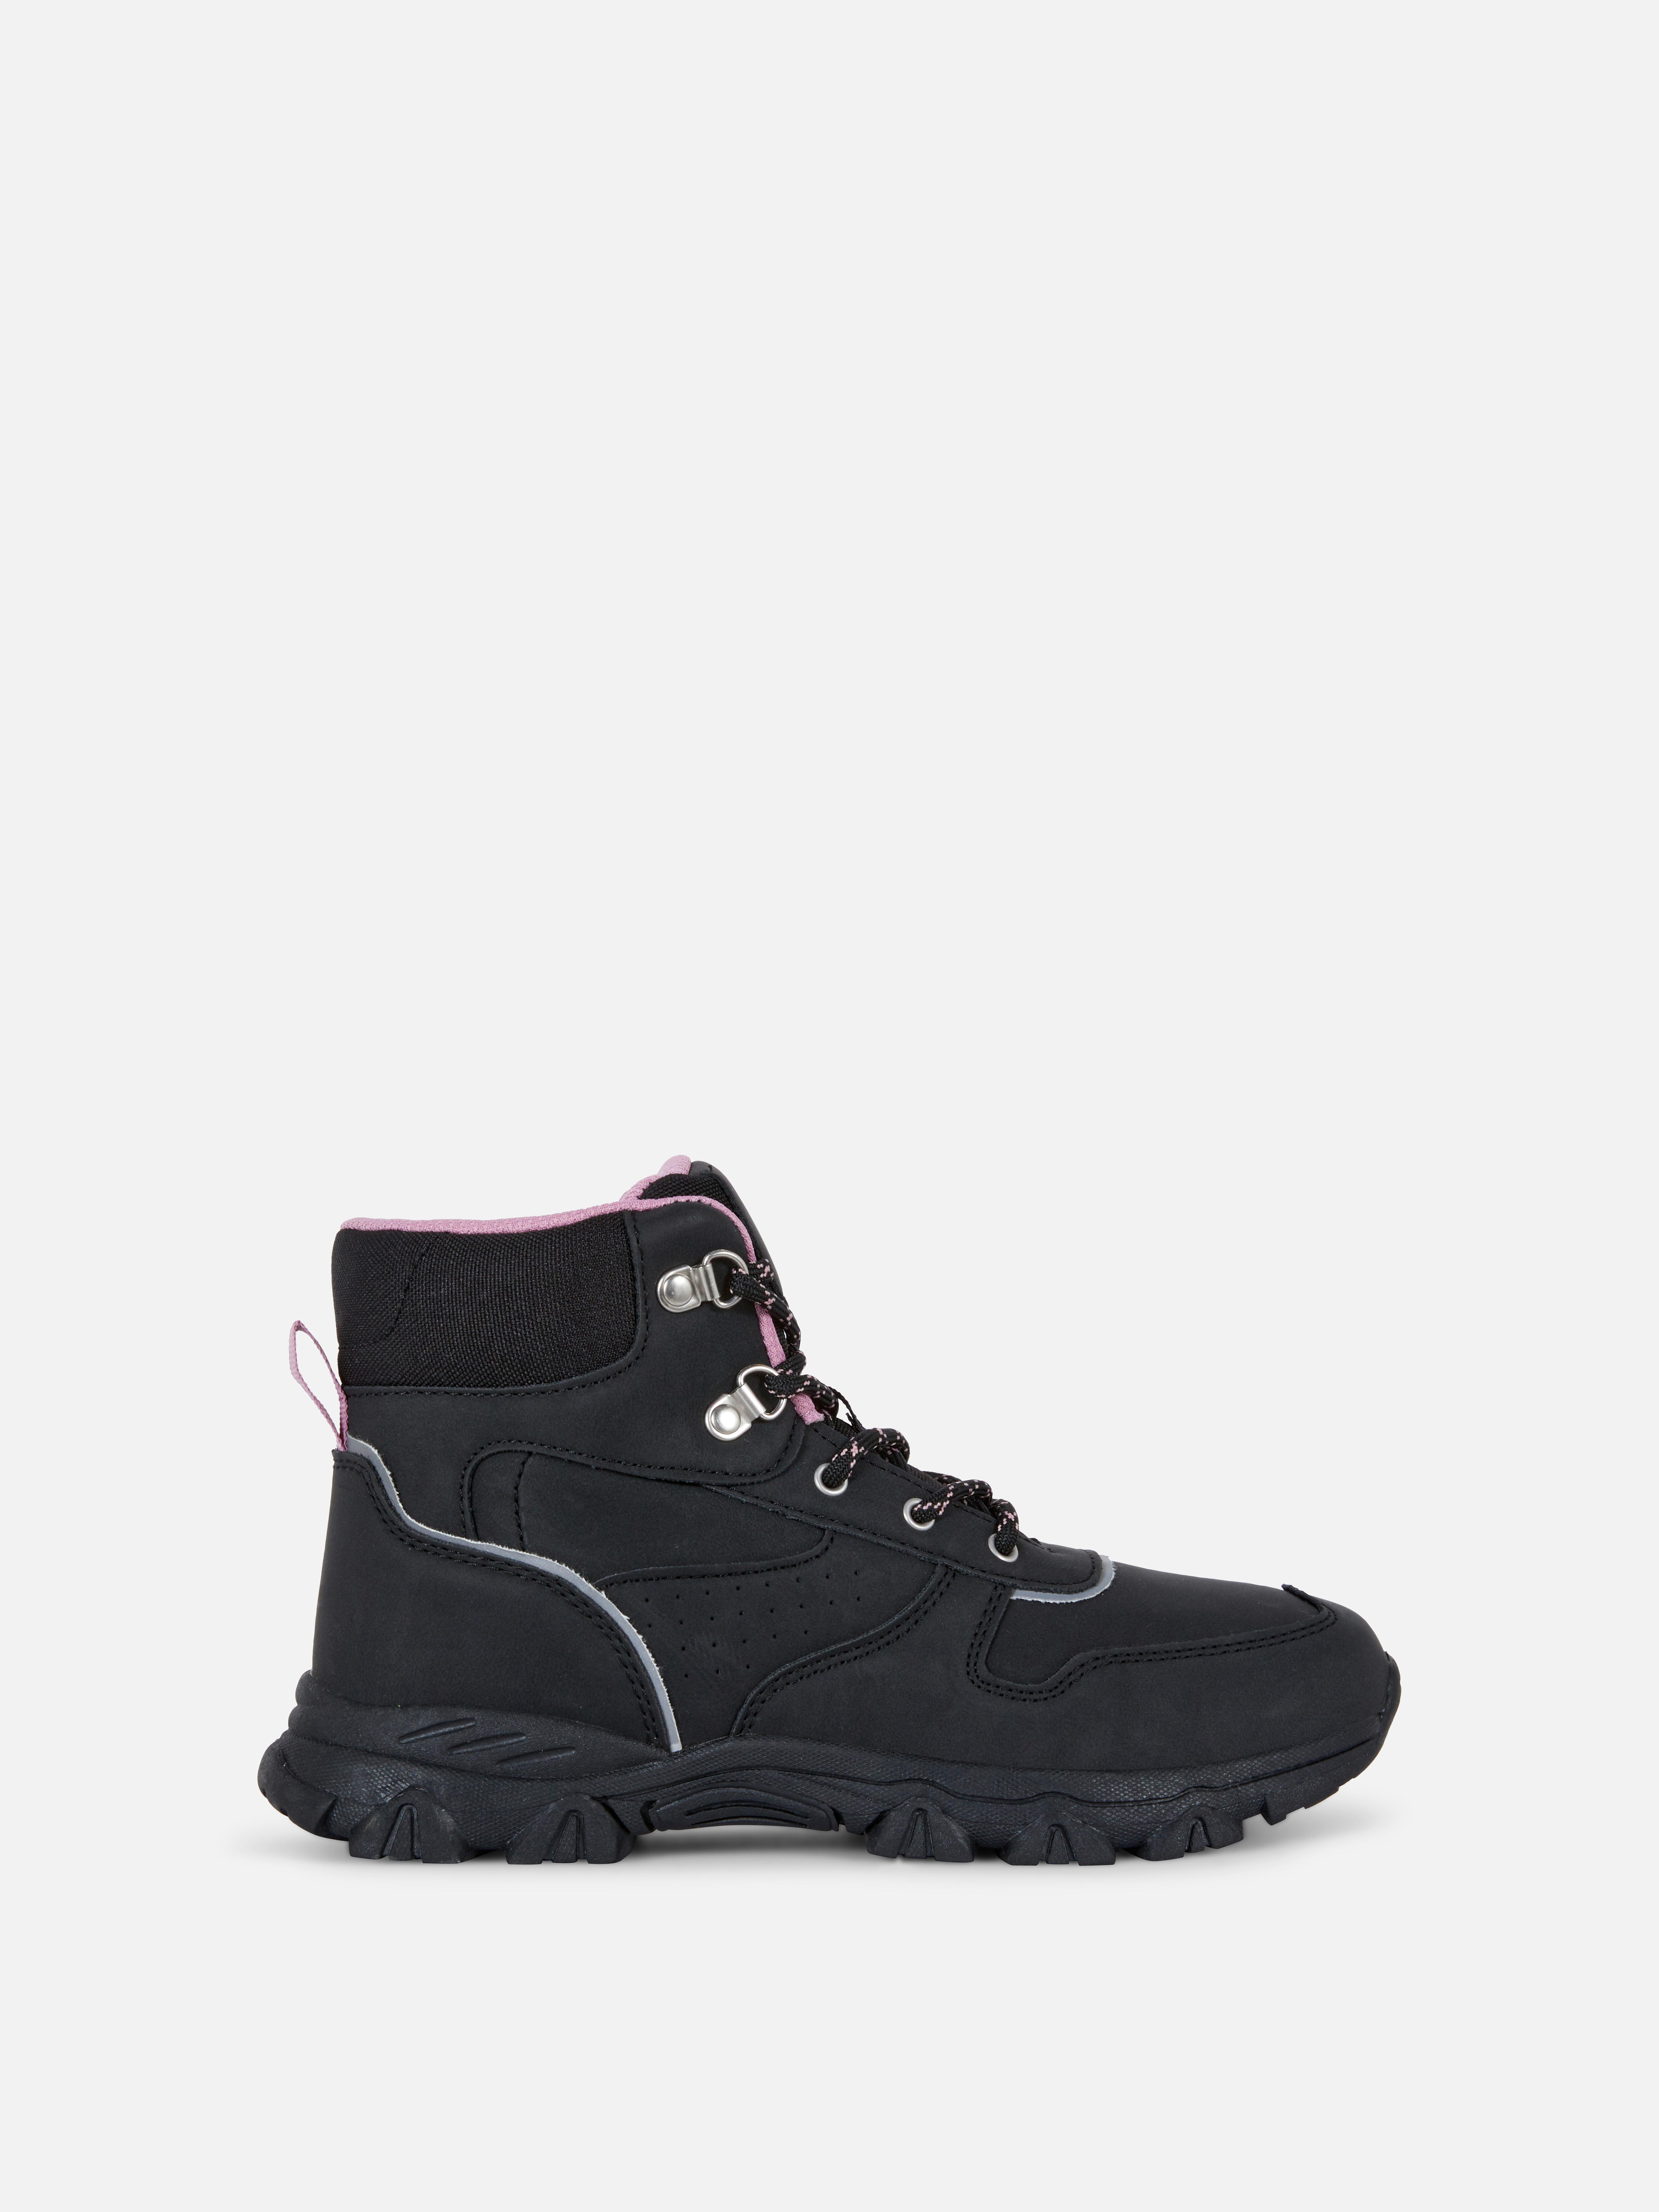 Two-Tone Hiking Boots